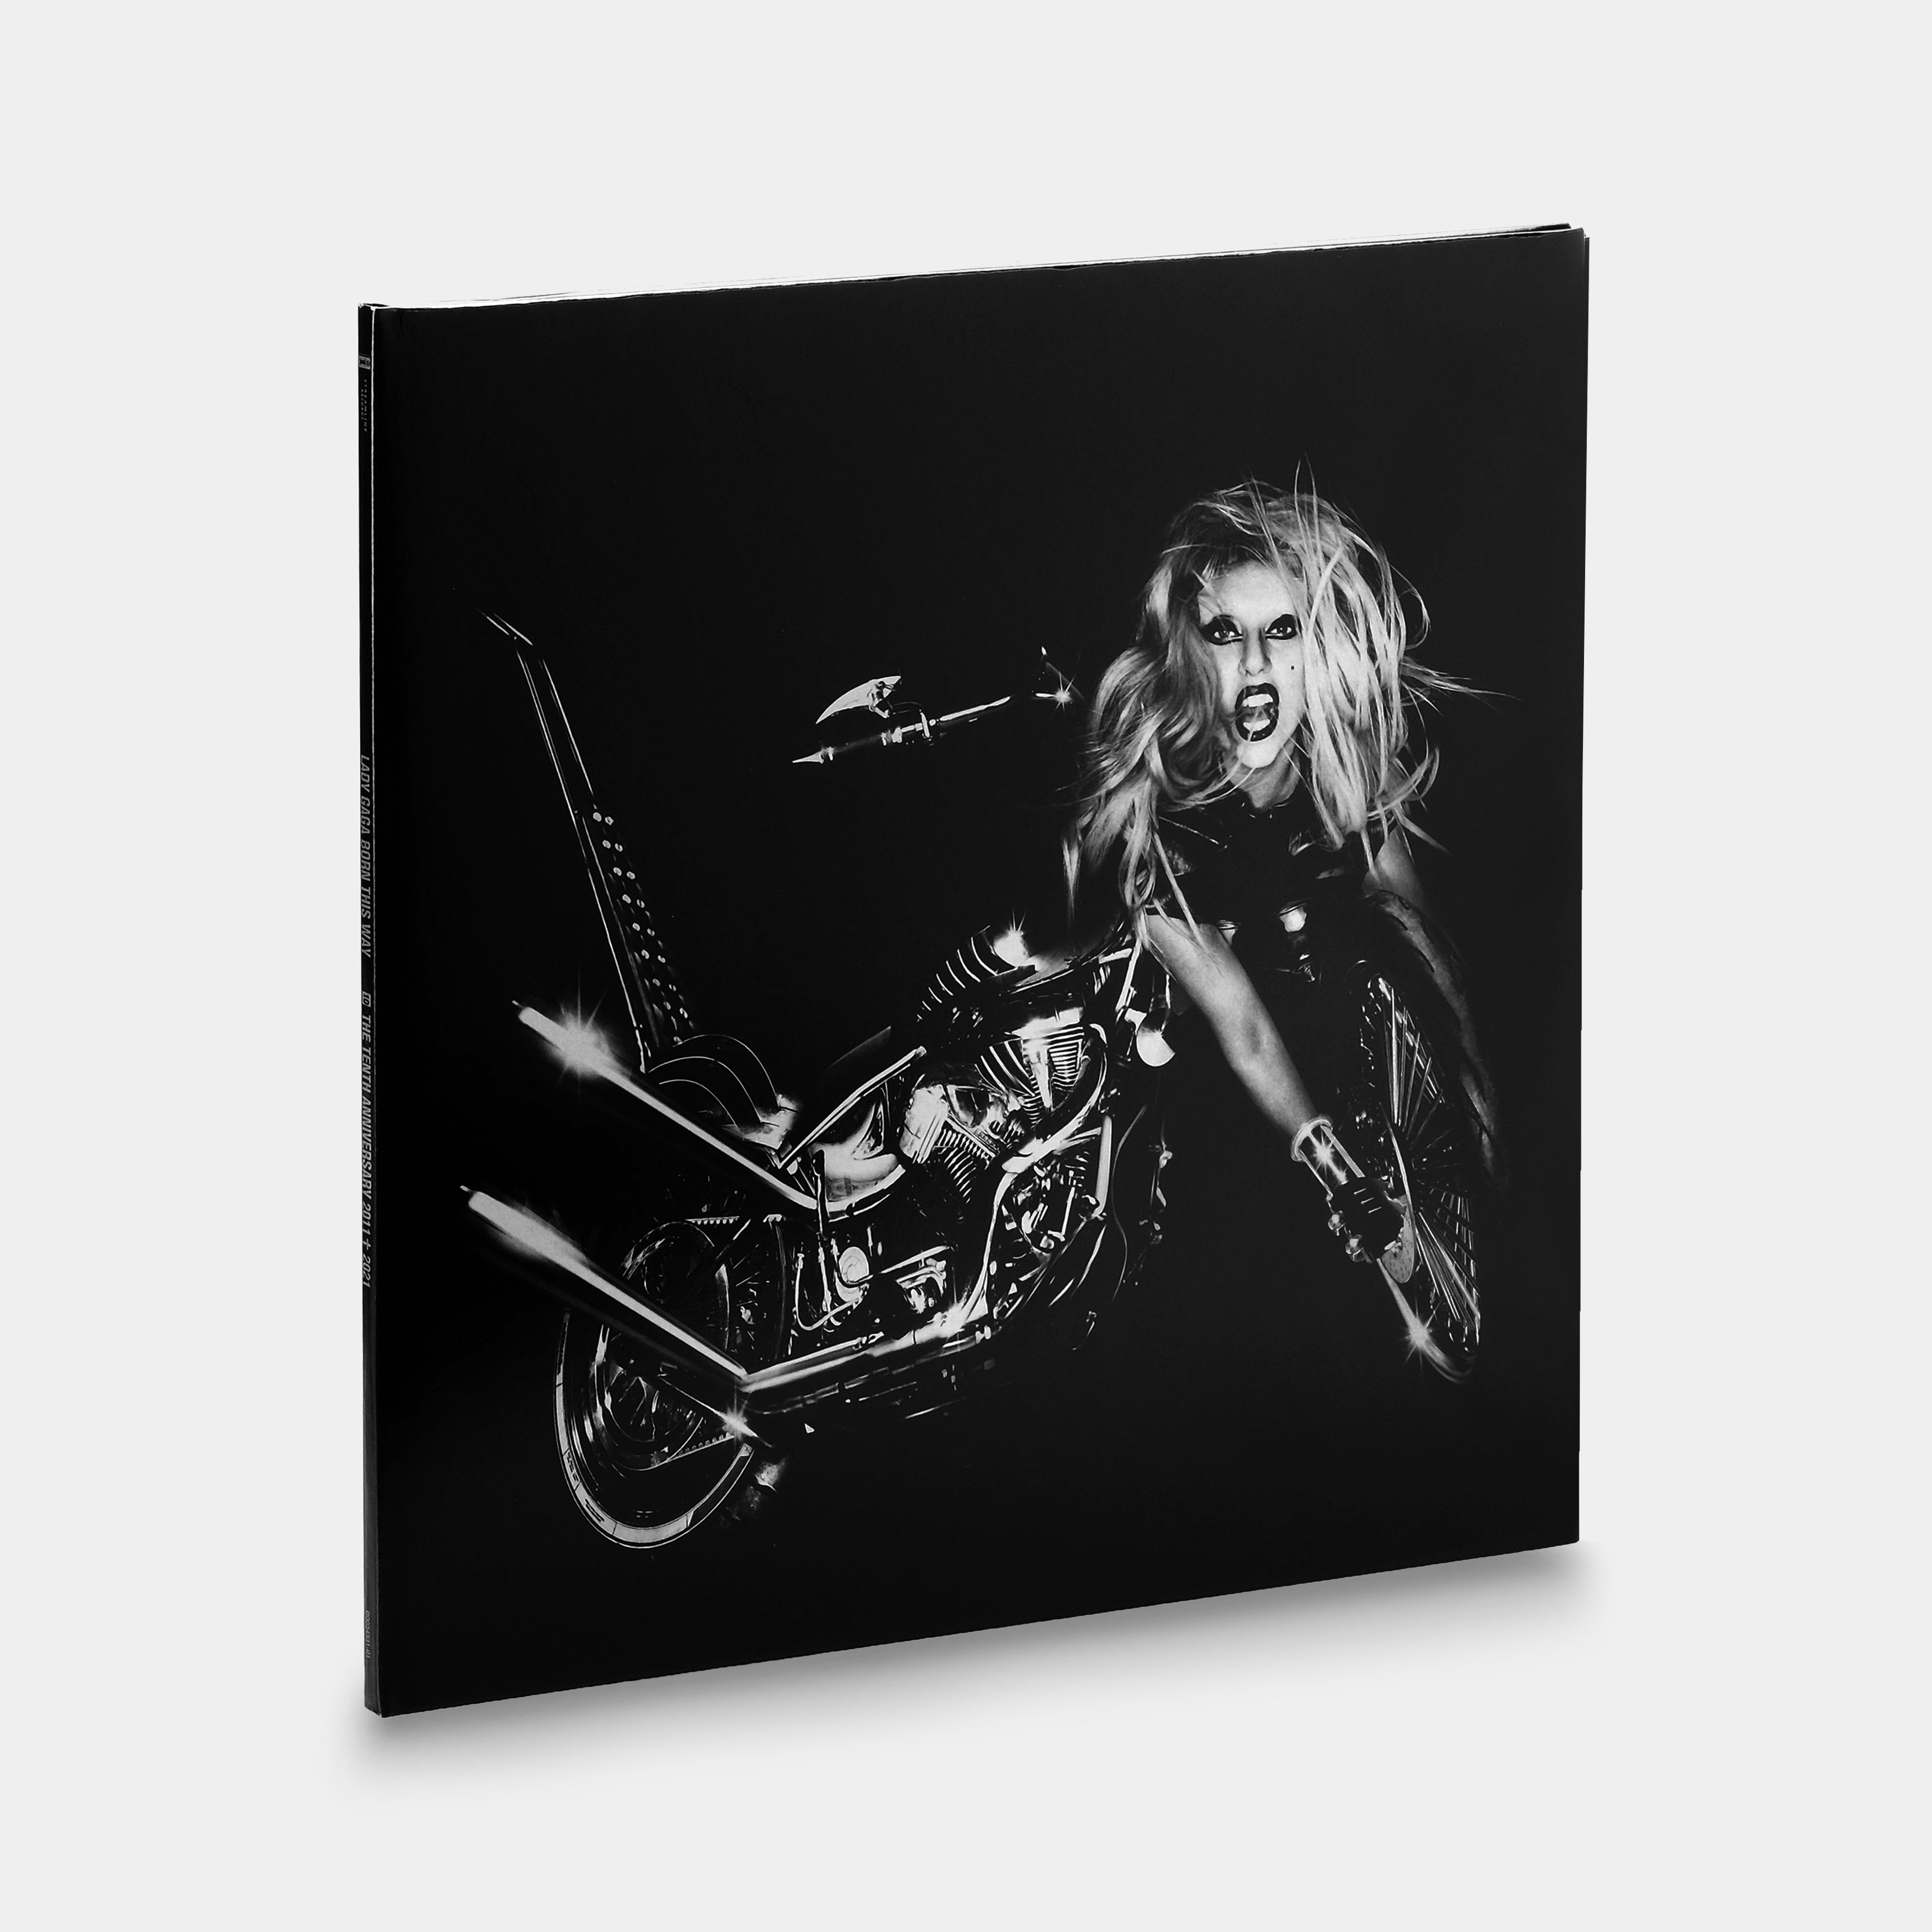 Lady Gaga - Born This Way (The Tenth Anniversary) / Born This Way Reimagined 3xLP Vinyl Record